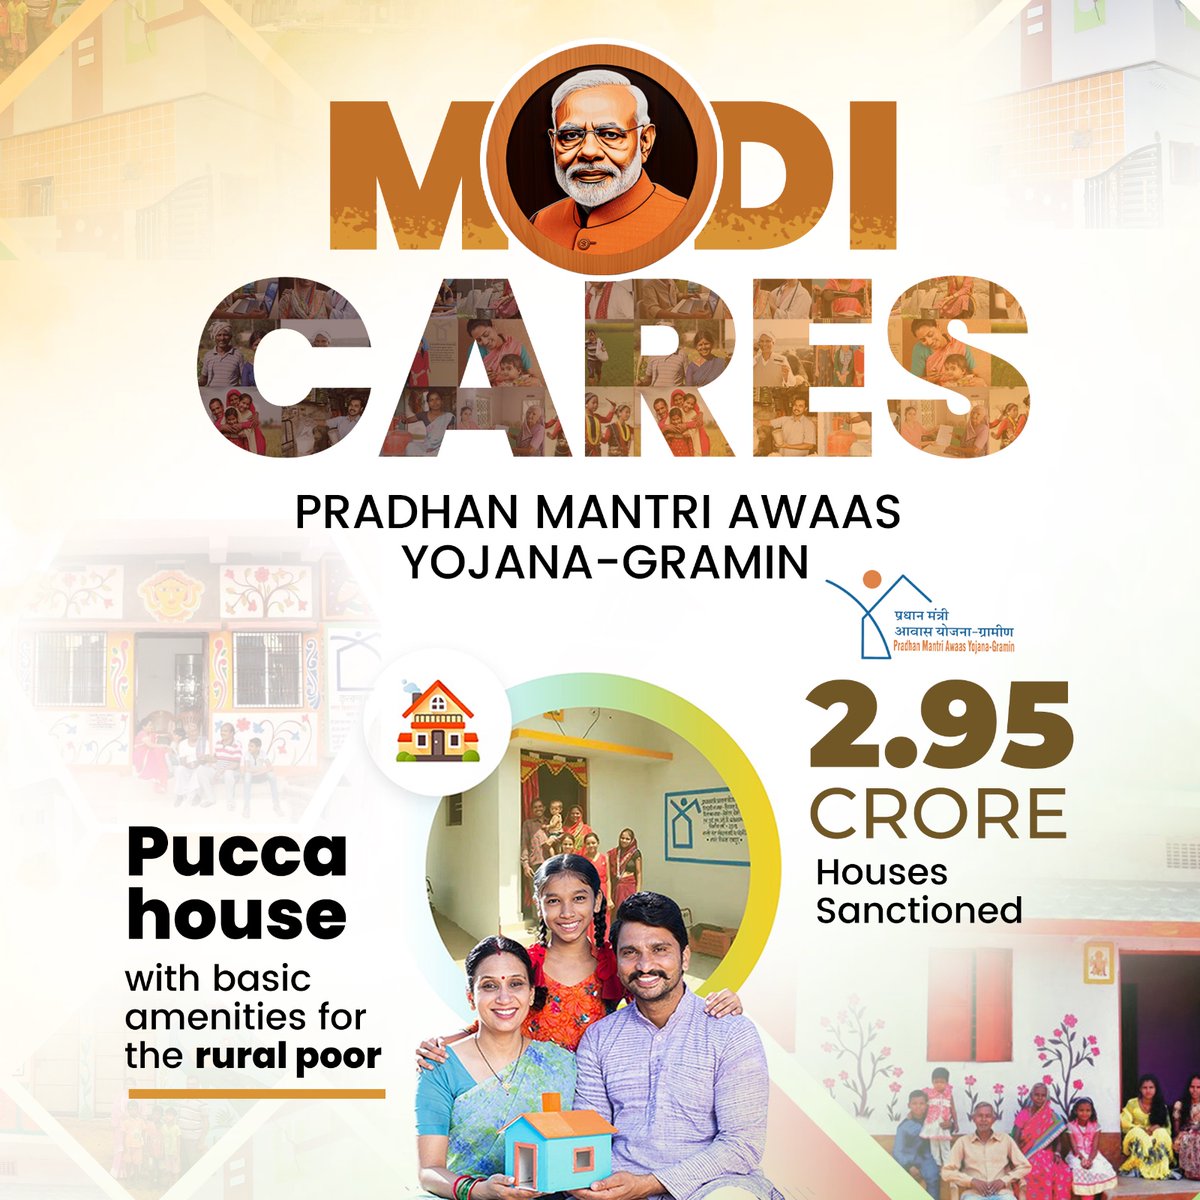 A leader who prioritizes the needs of the underprivileged. 2.95 crore houses sanctioned for the rural poor.